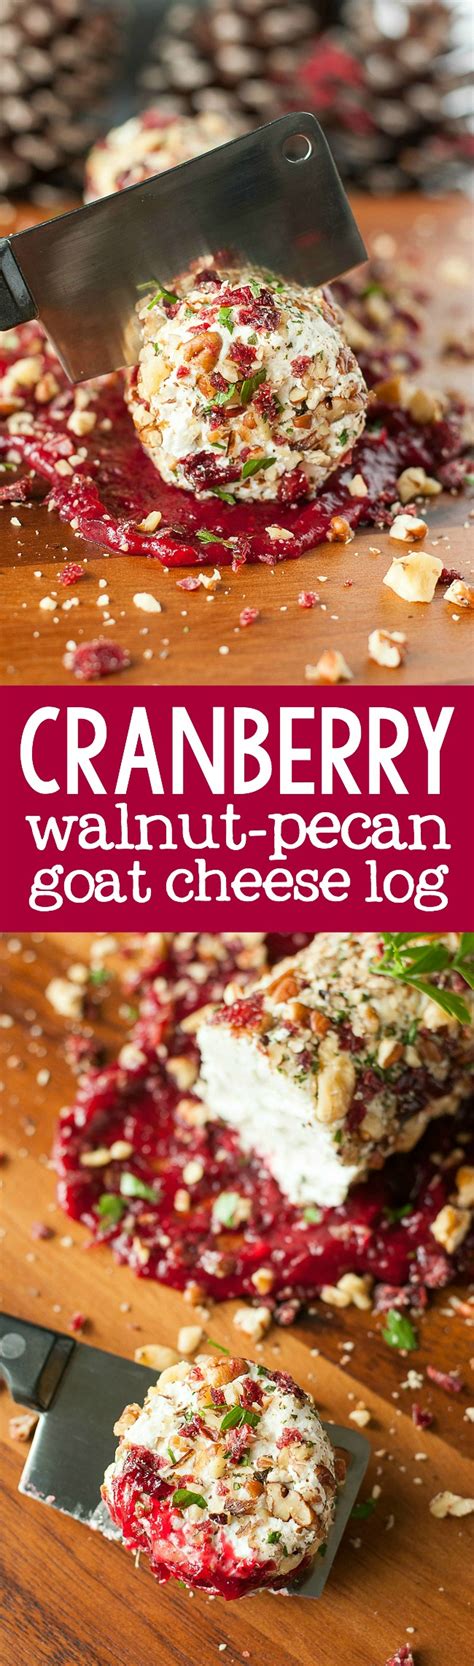 Cranberry Goat Cheese Log With Walnuts Pecans And Parsley